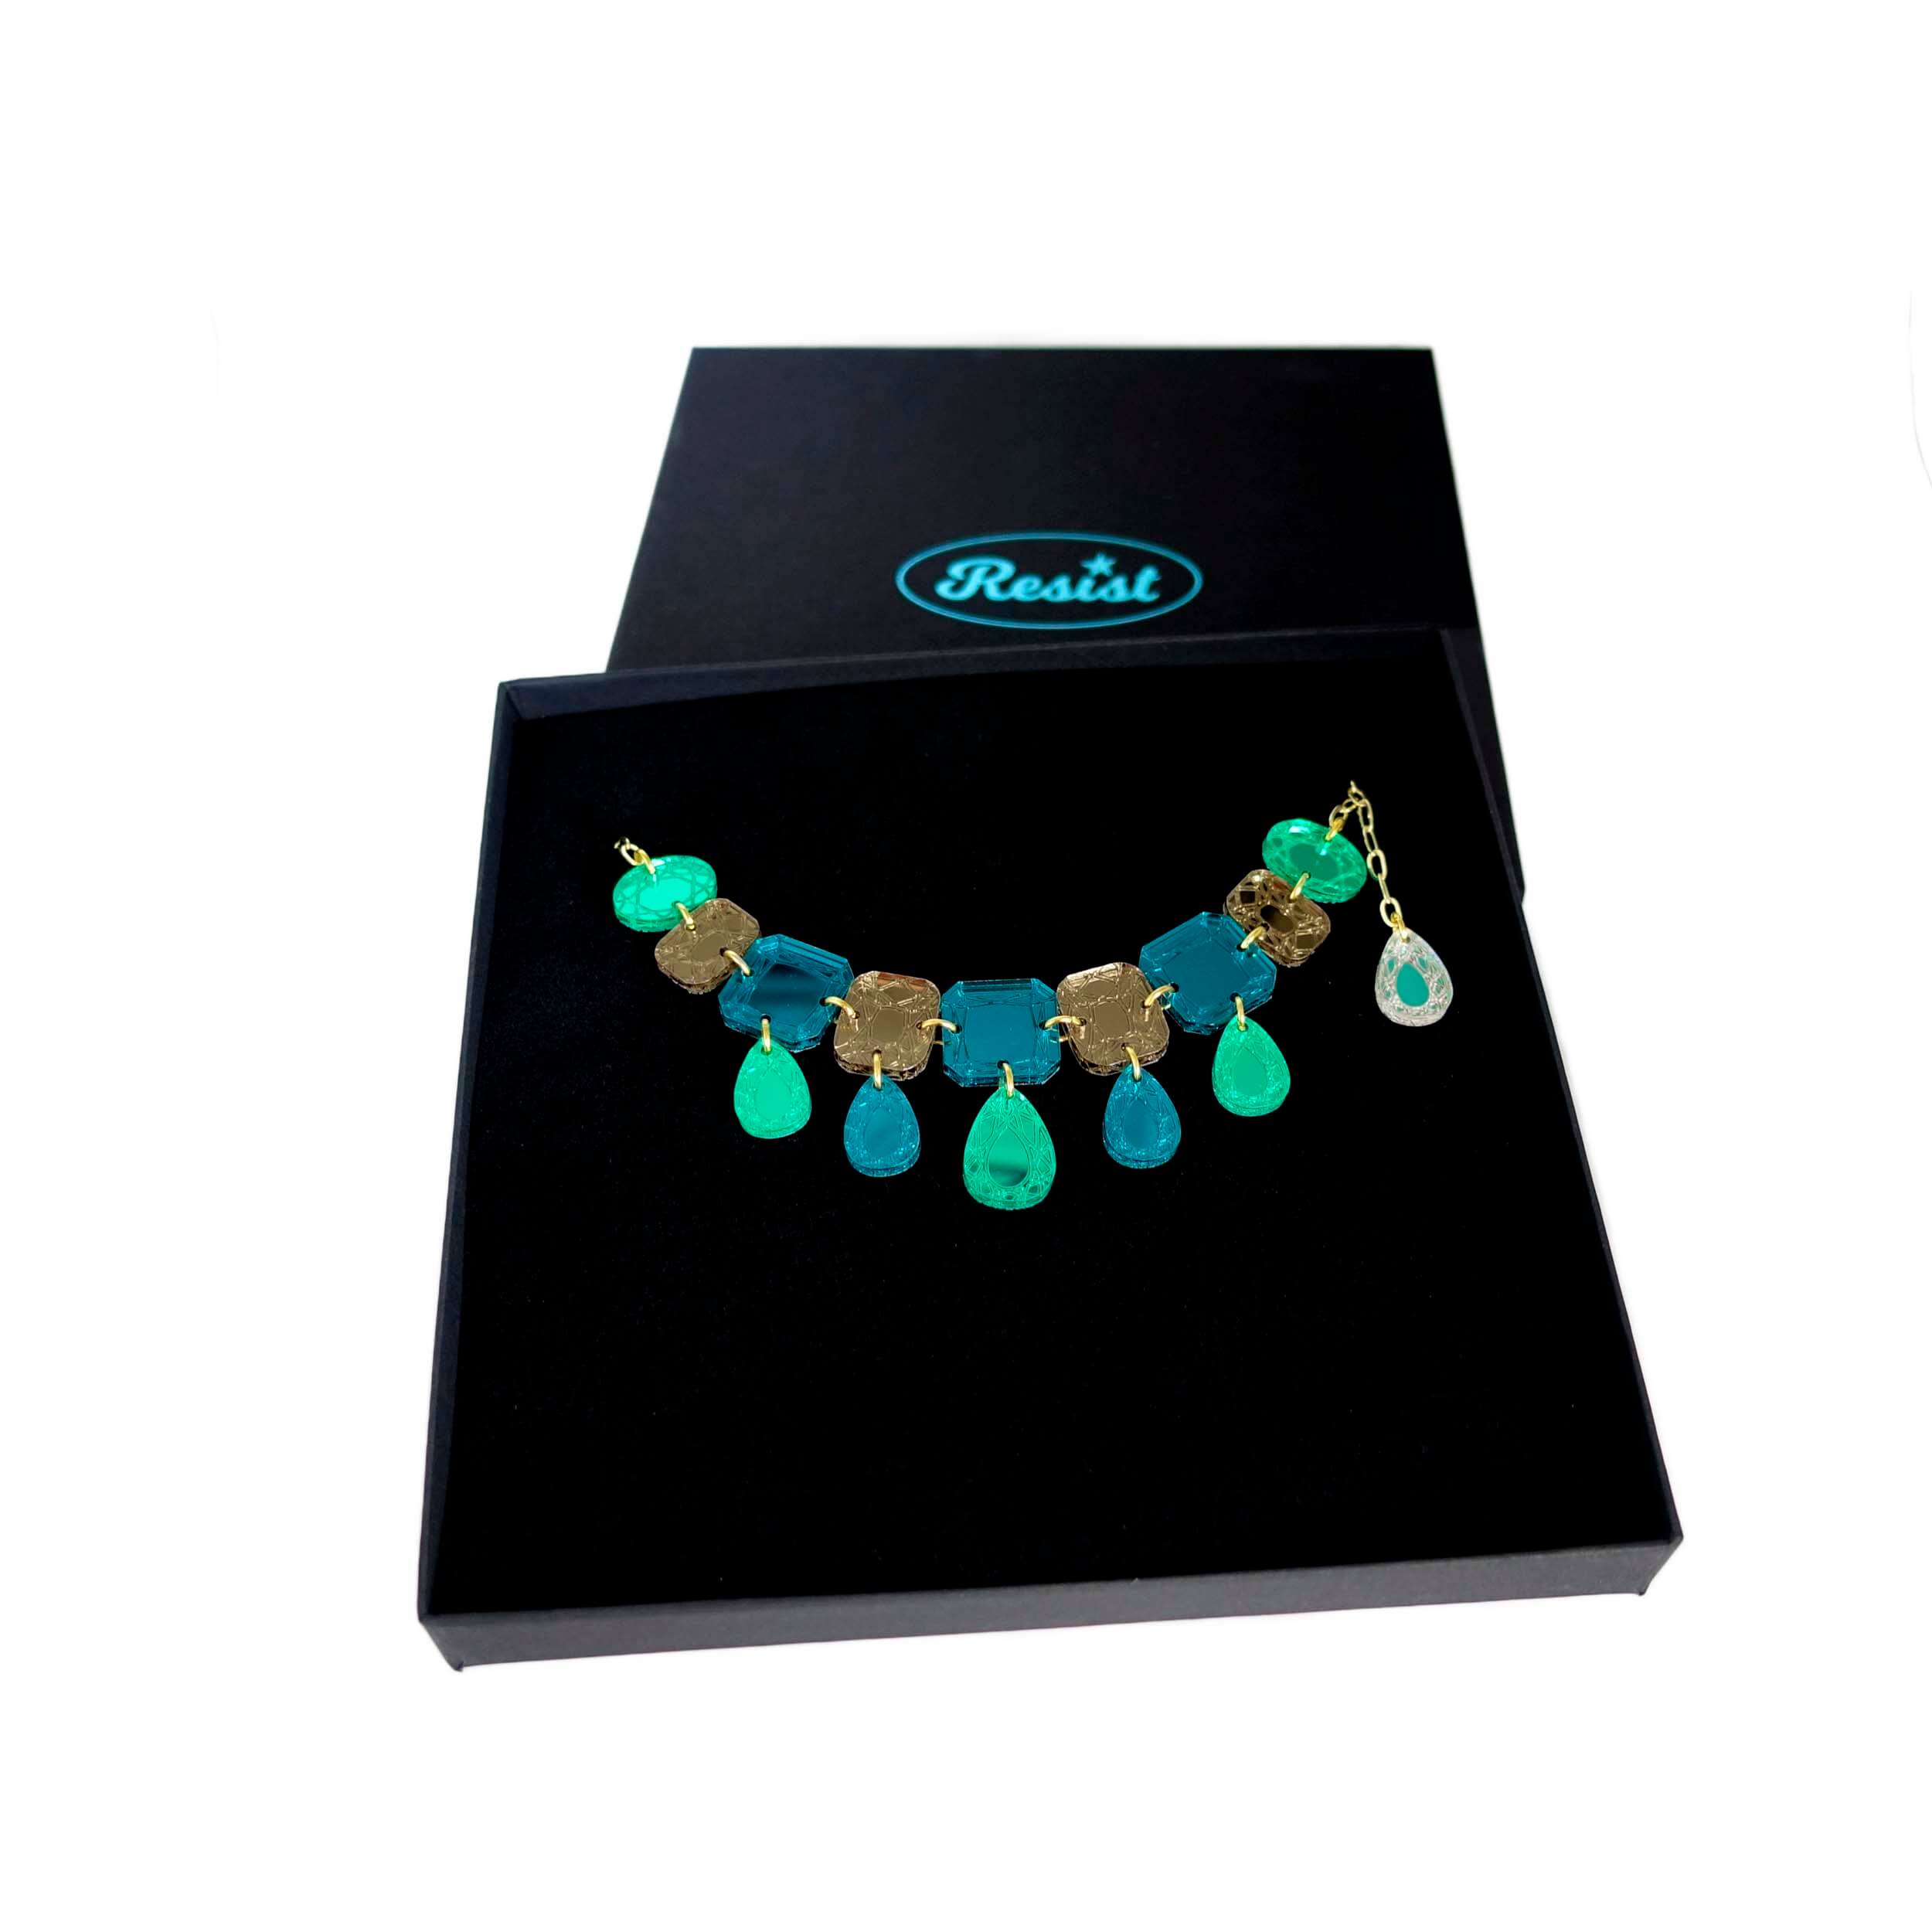 Austerity jewels necklace in teal époque colours, shown in a Wear and Resist gift box. 